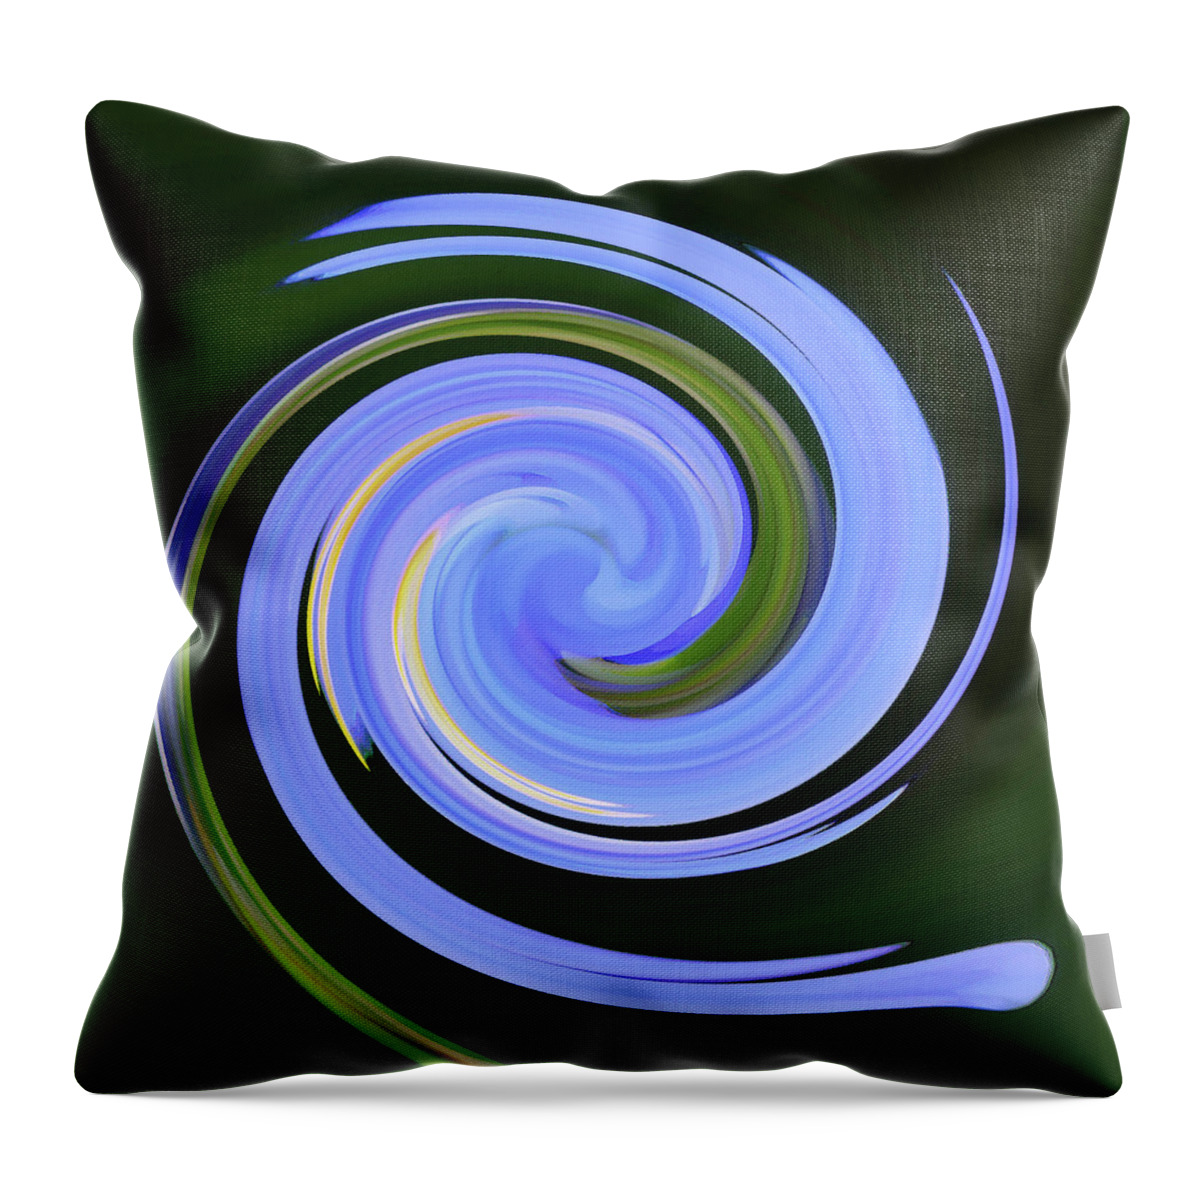 Flower Throw Pillow featuring the photograph Floral Swirl 8 by Margaret Saheed